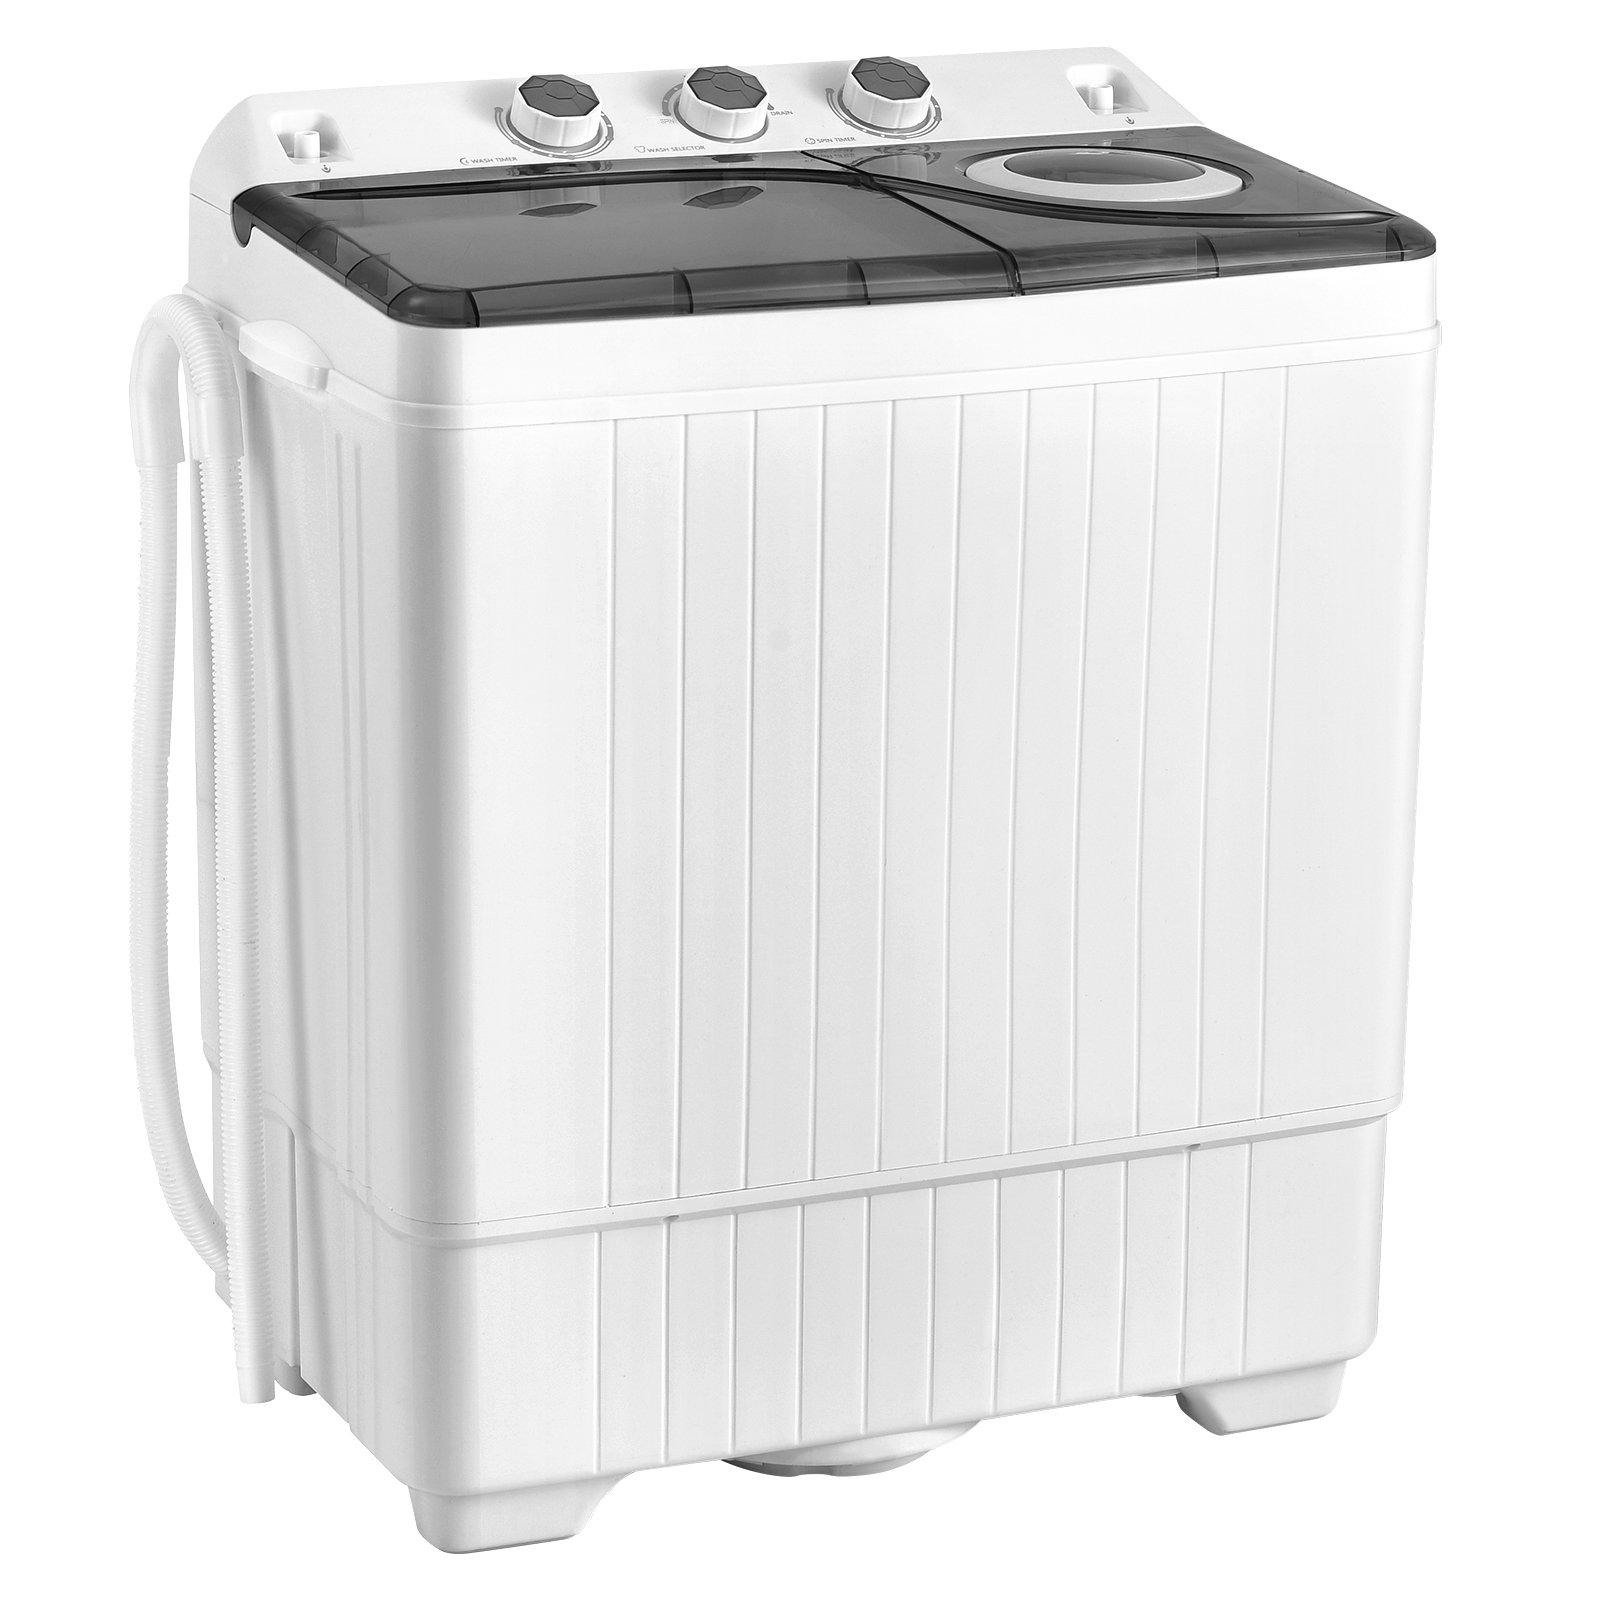 Portable Washing Machine Twin Tub Washer and Spin Dryer Semi-automatic Laundry Washer